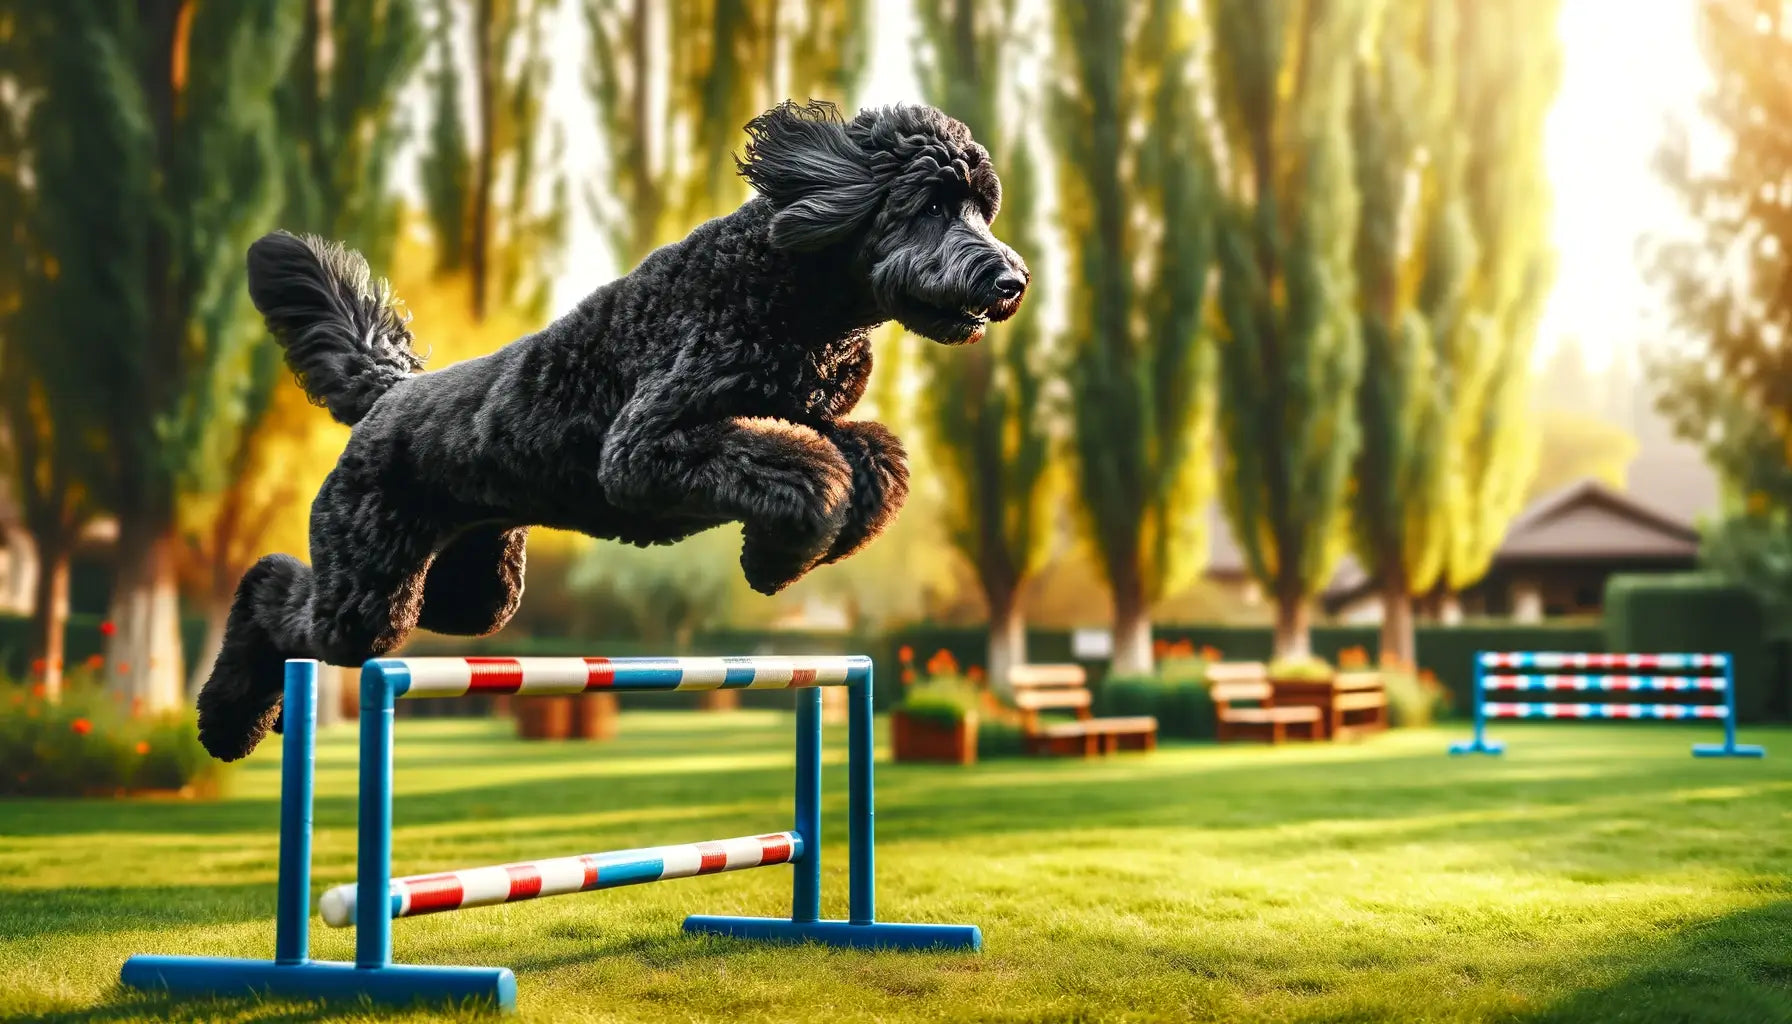 Black Goldendoodle jumping over a hurdle in a park, displaying agility and enthusiasm.